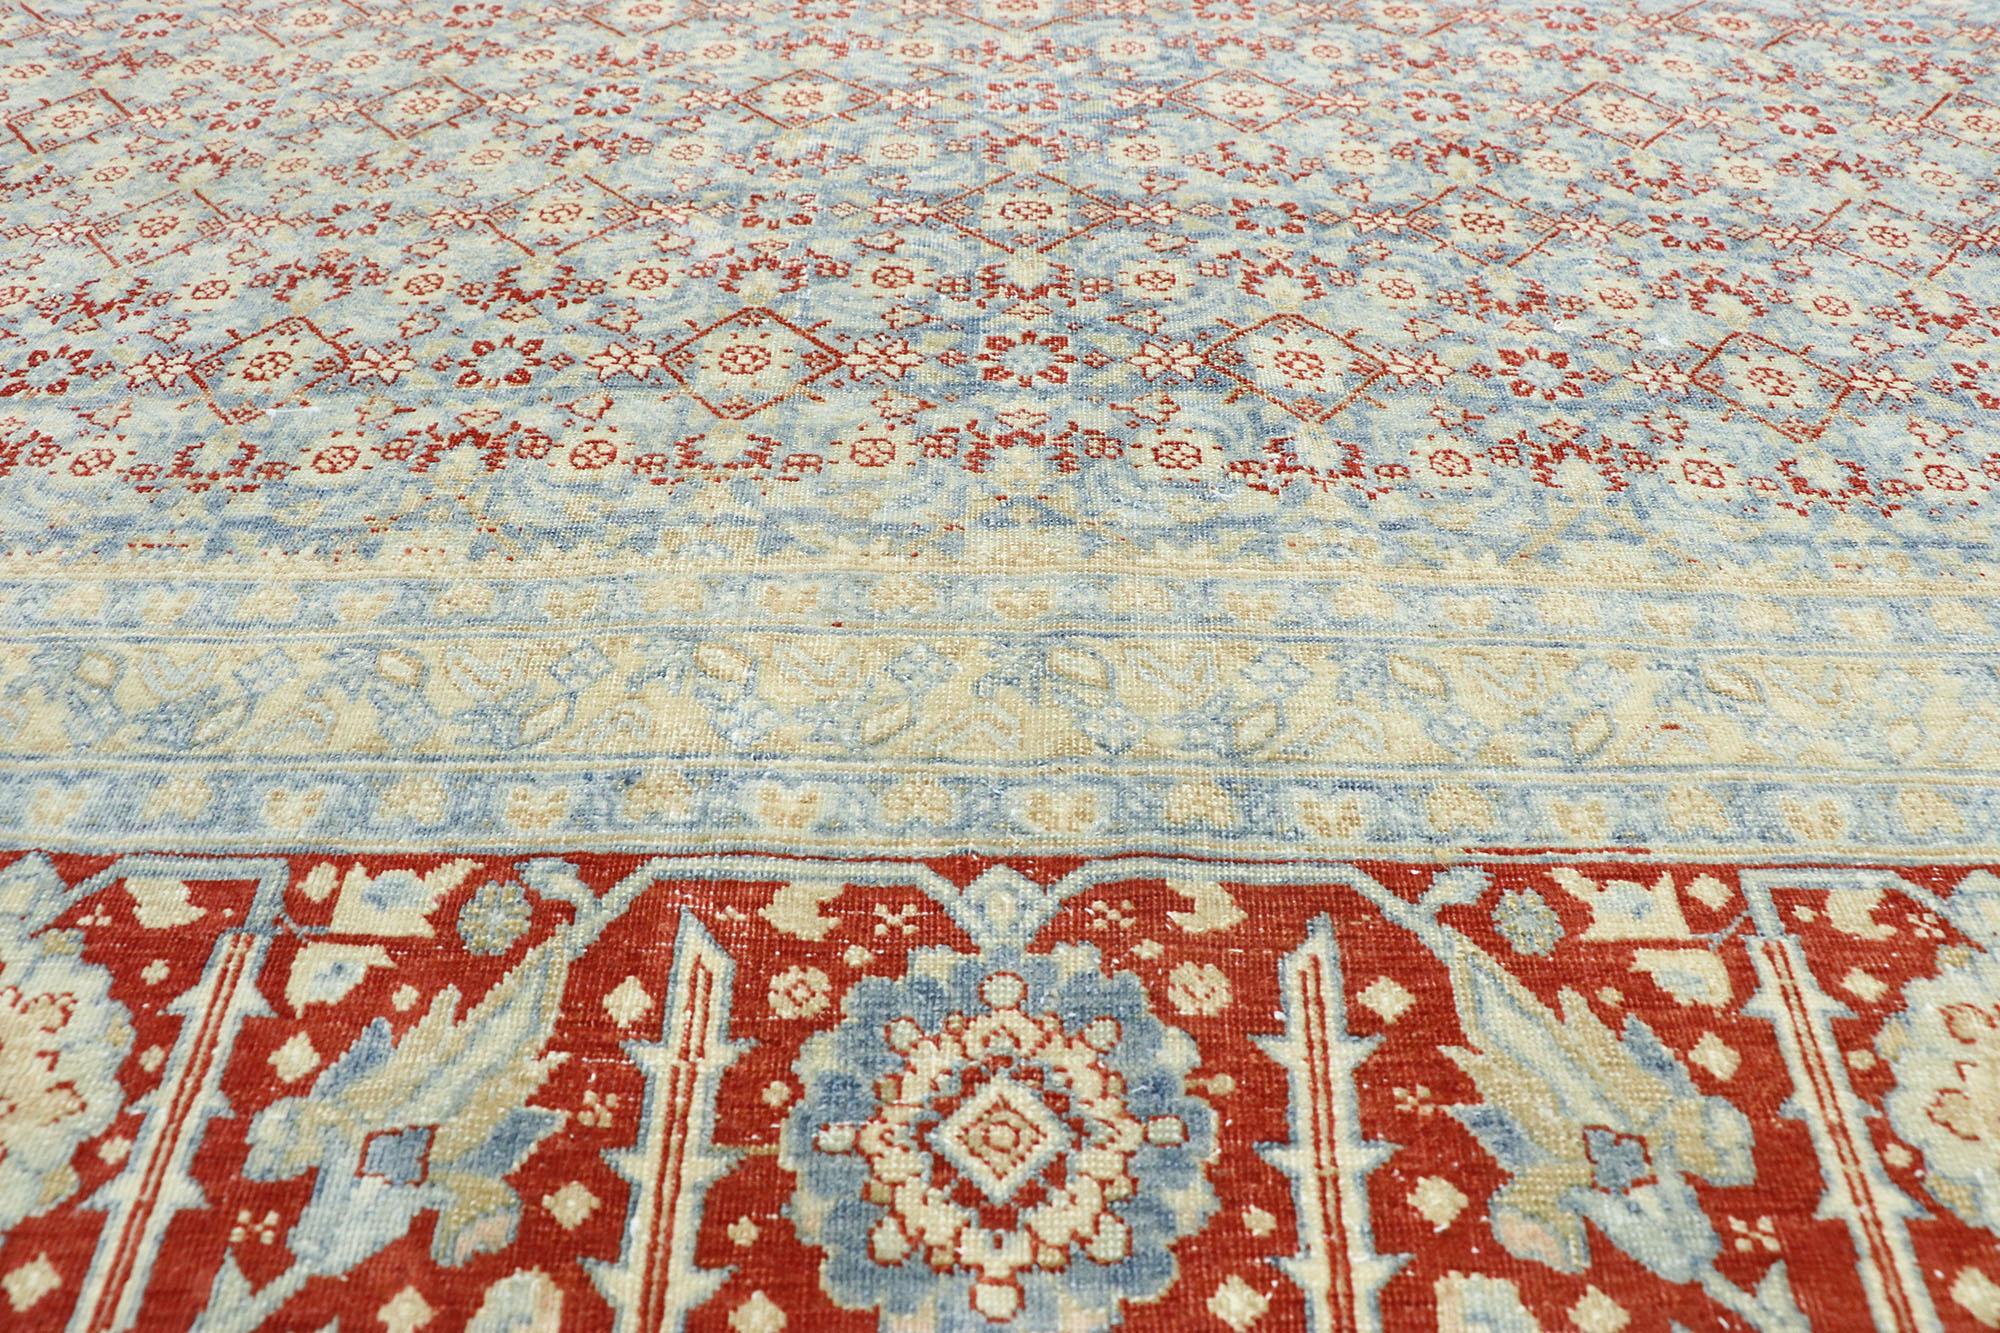 Hand-Knotted Vintage Persian Tabriz Design Rug with Southern Living American Colonial Style For Sale